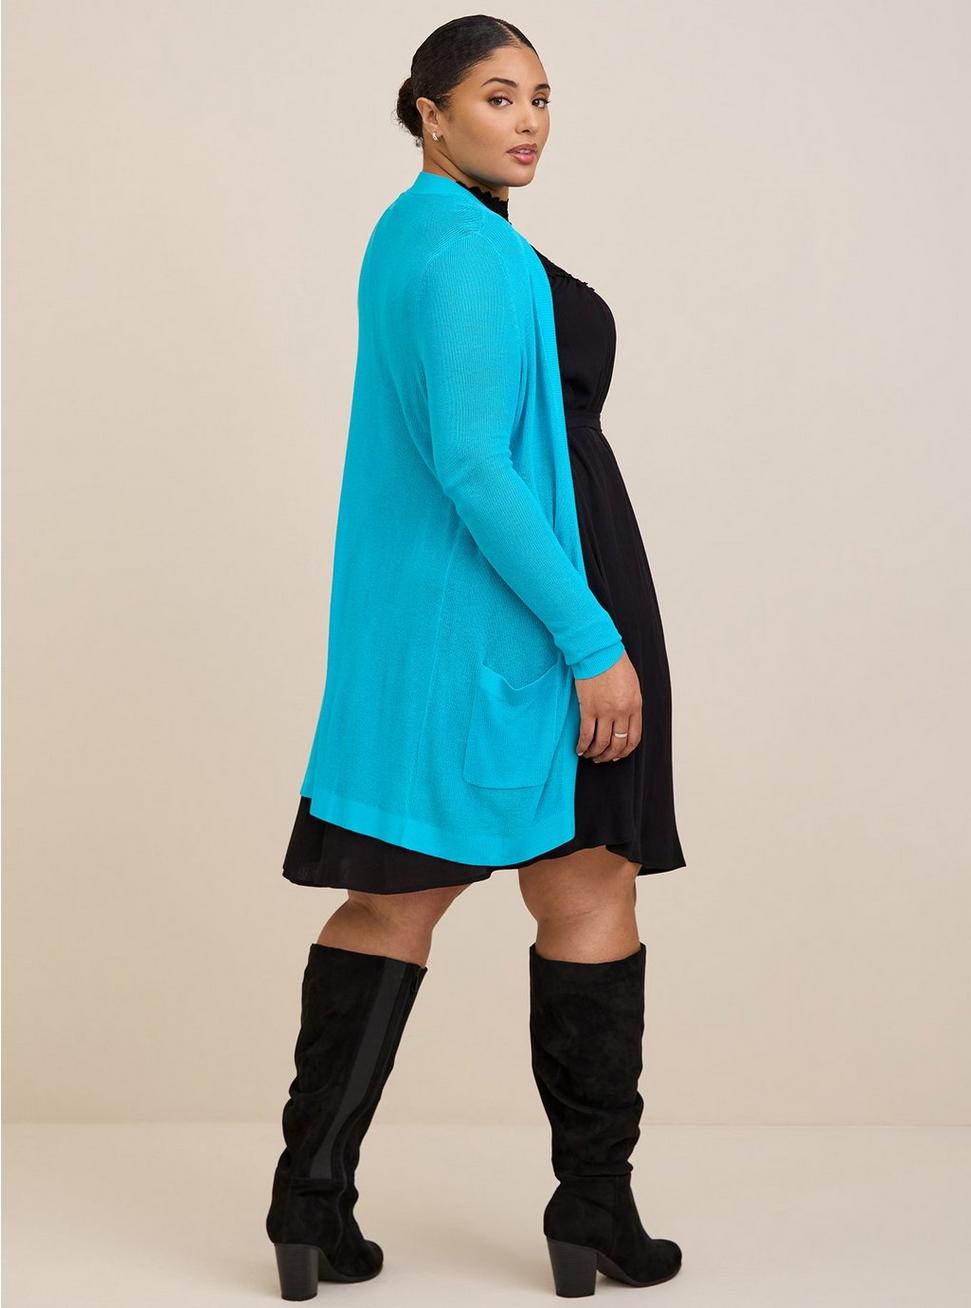 Cardigan Open Front Sweater, TEAL, alternate